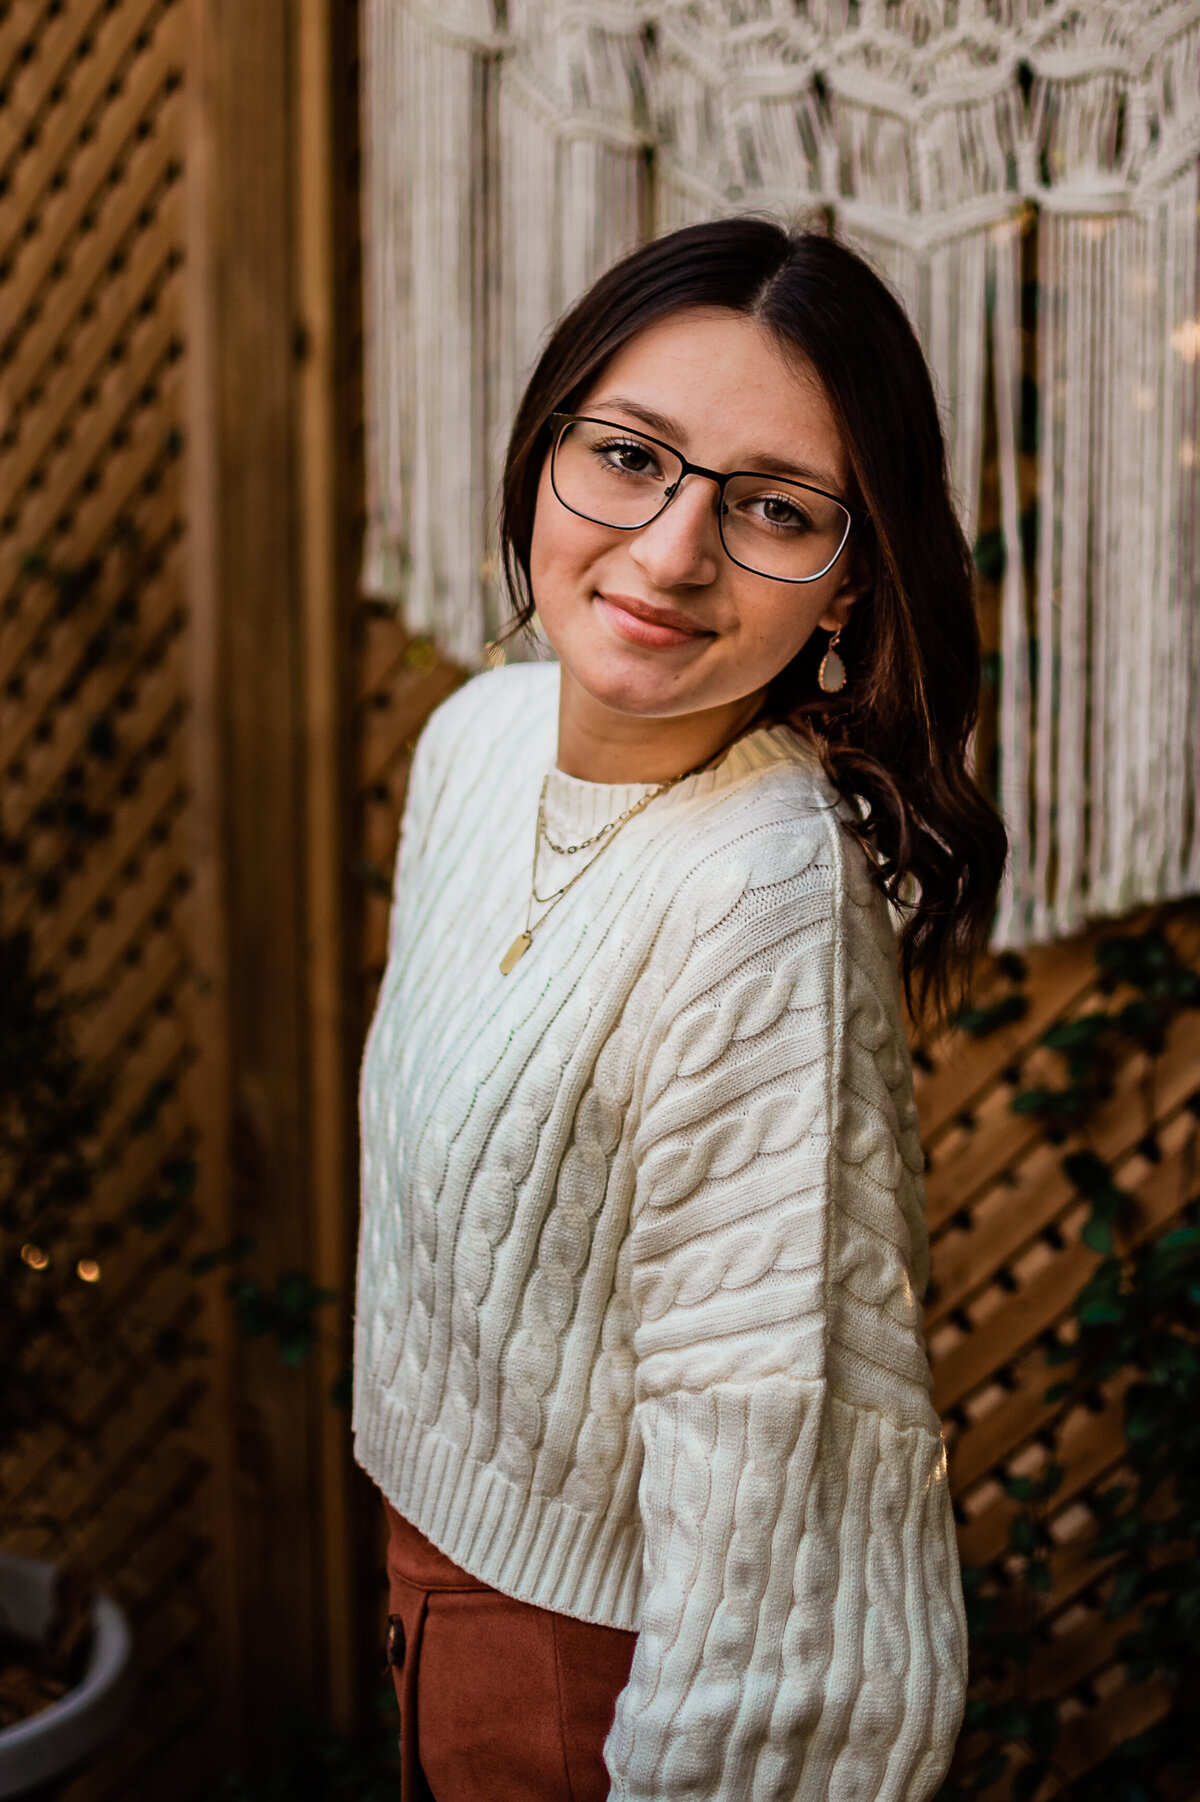 A senior wearing a white sweater stands in front of a boho inspired backdrop and smiles at the camera.